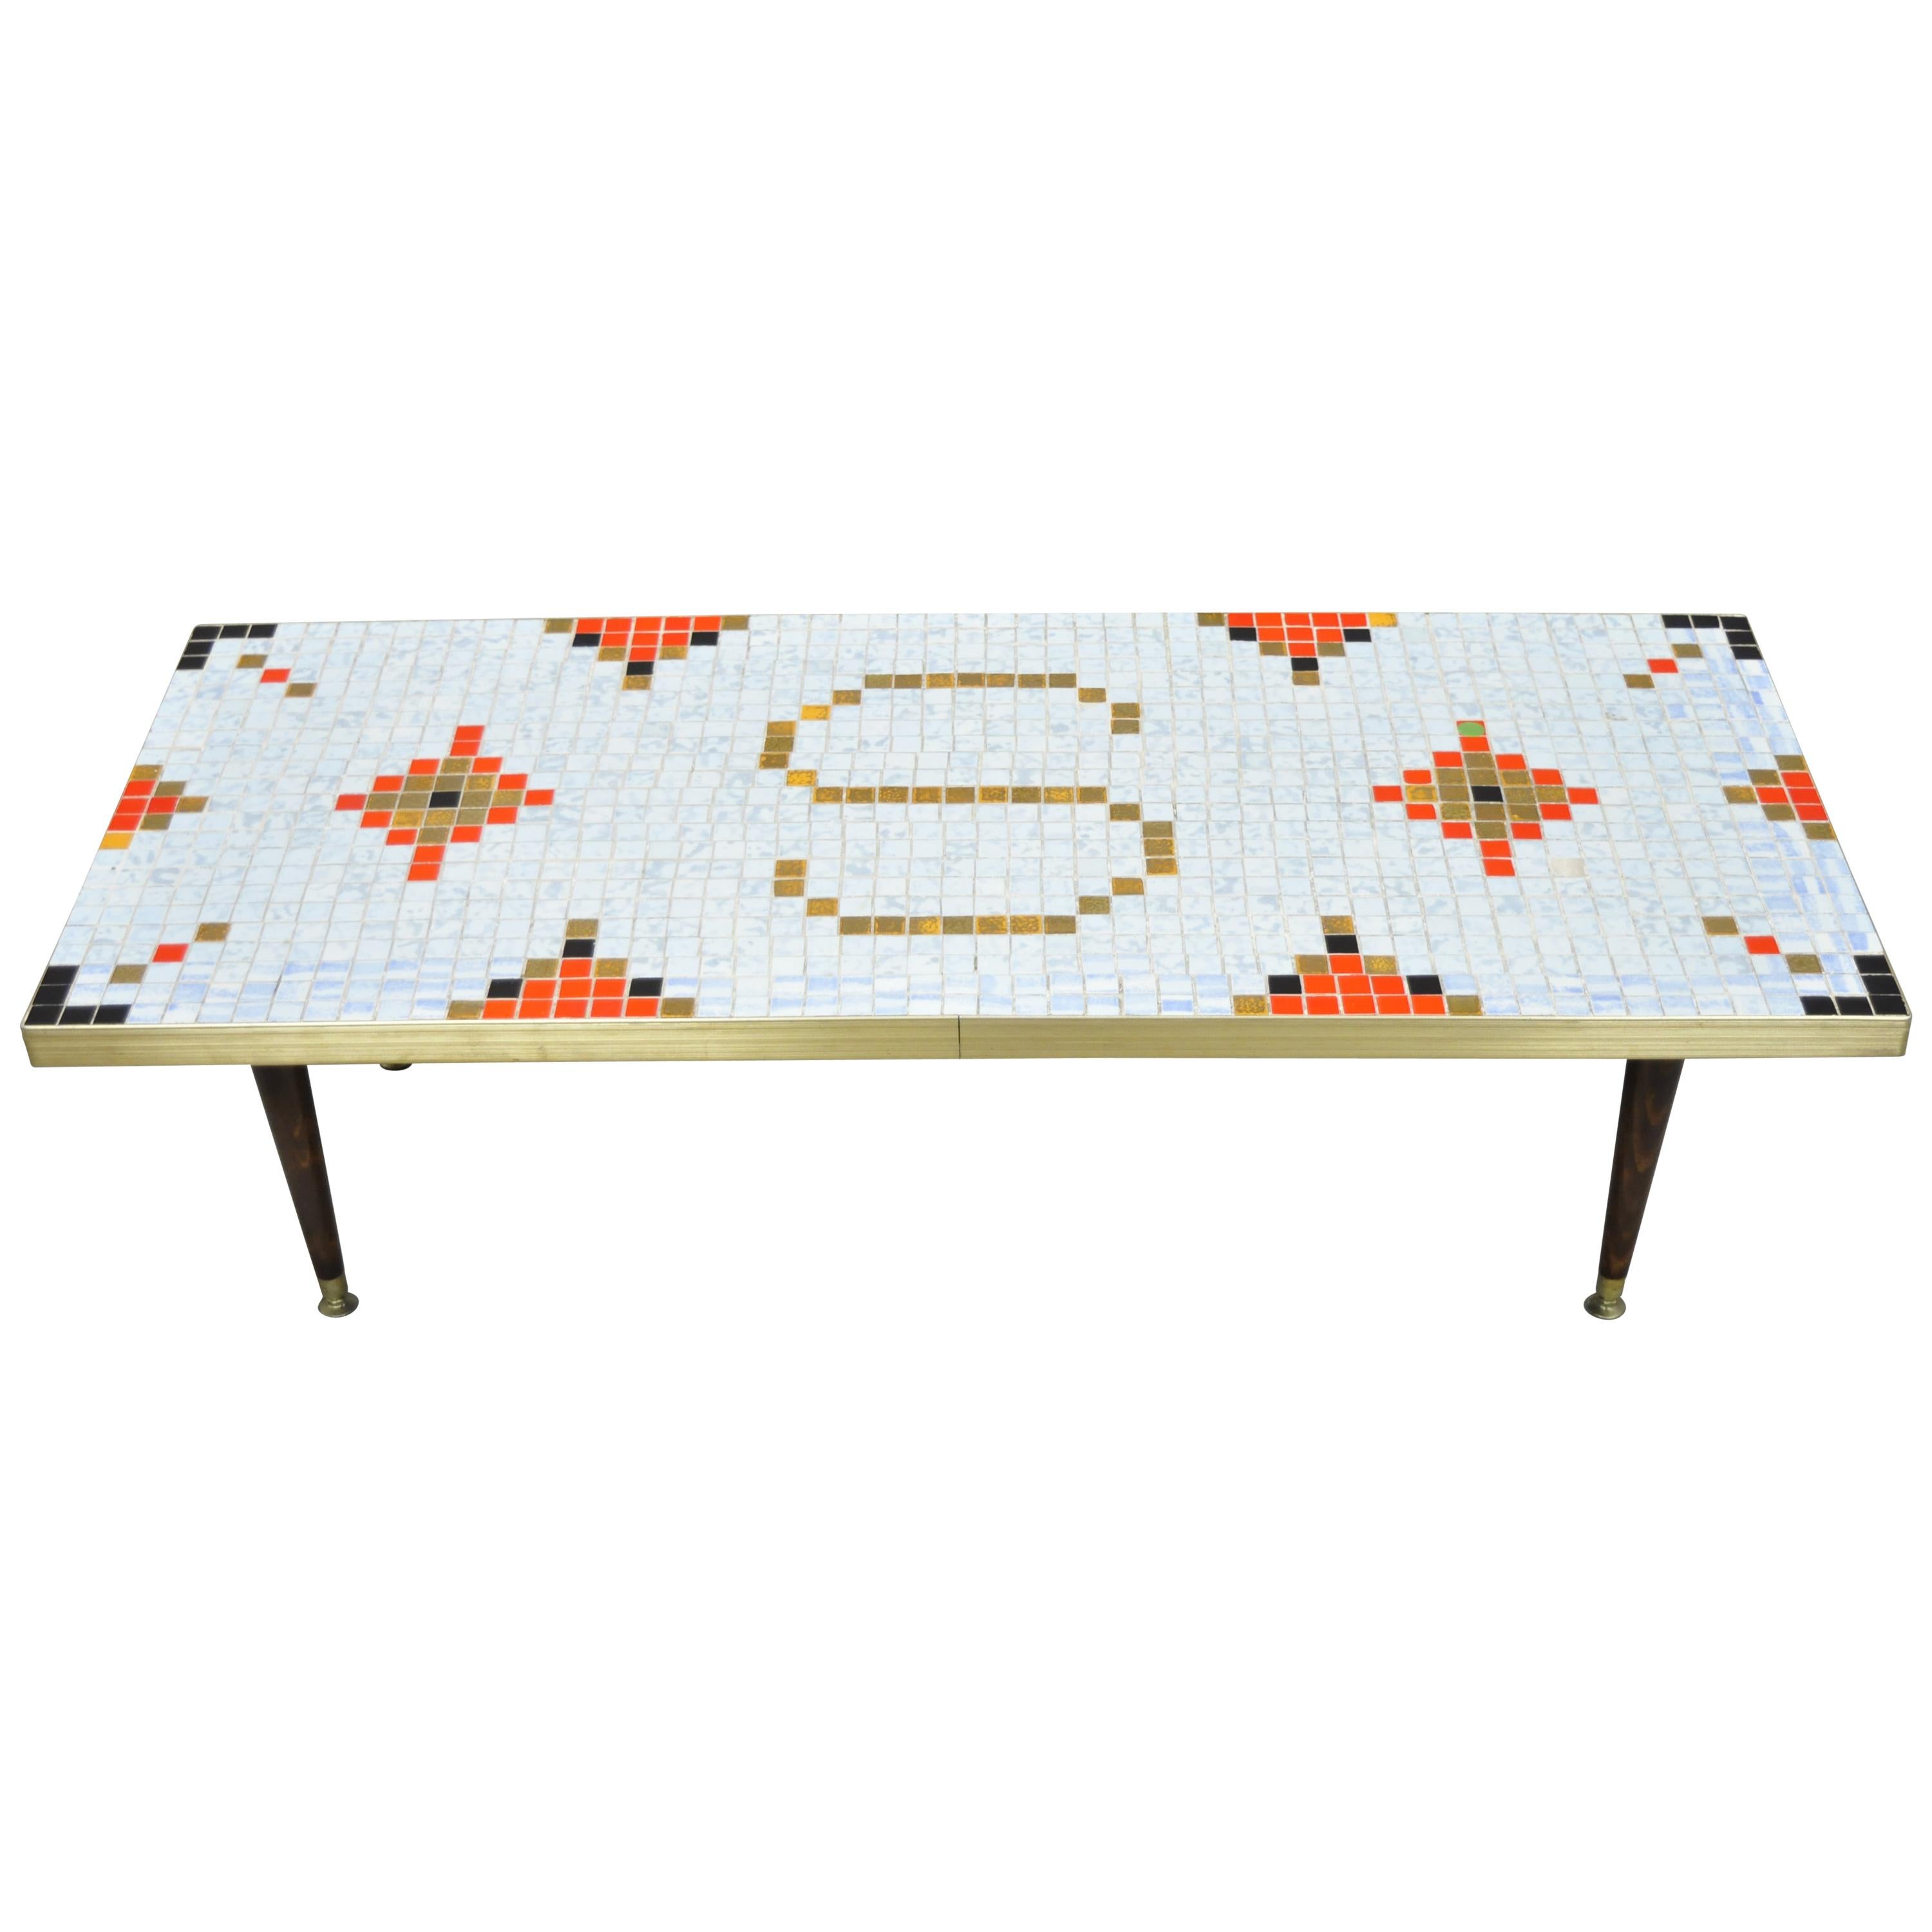 Vintage Mid-Century Modern Mosaic Tile Top Coffee Table with "S" Monogram